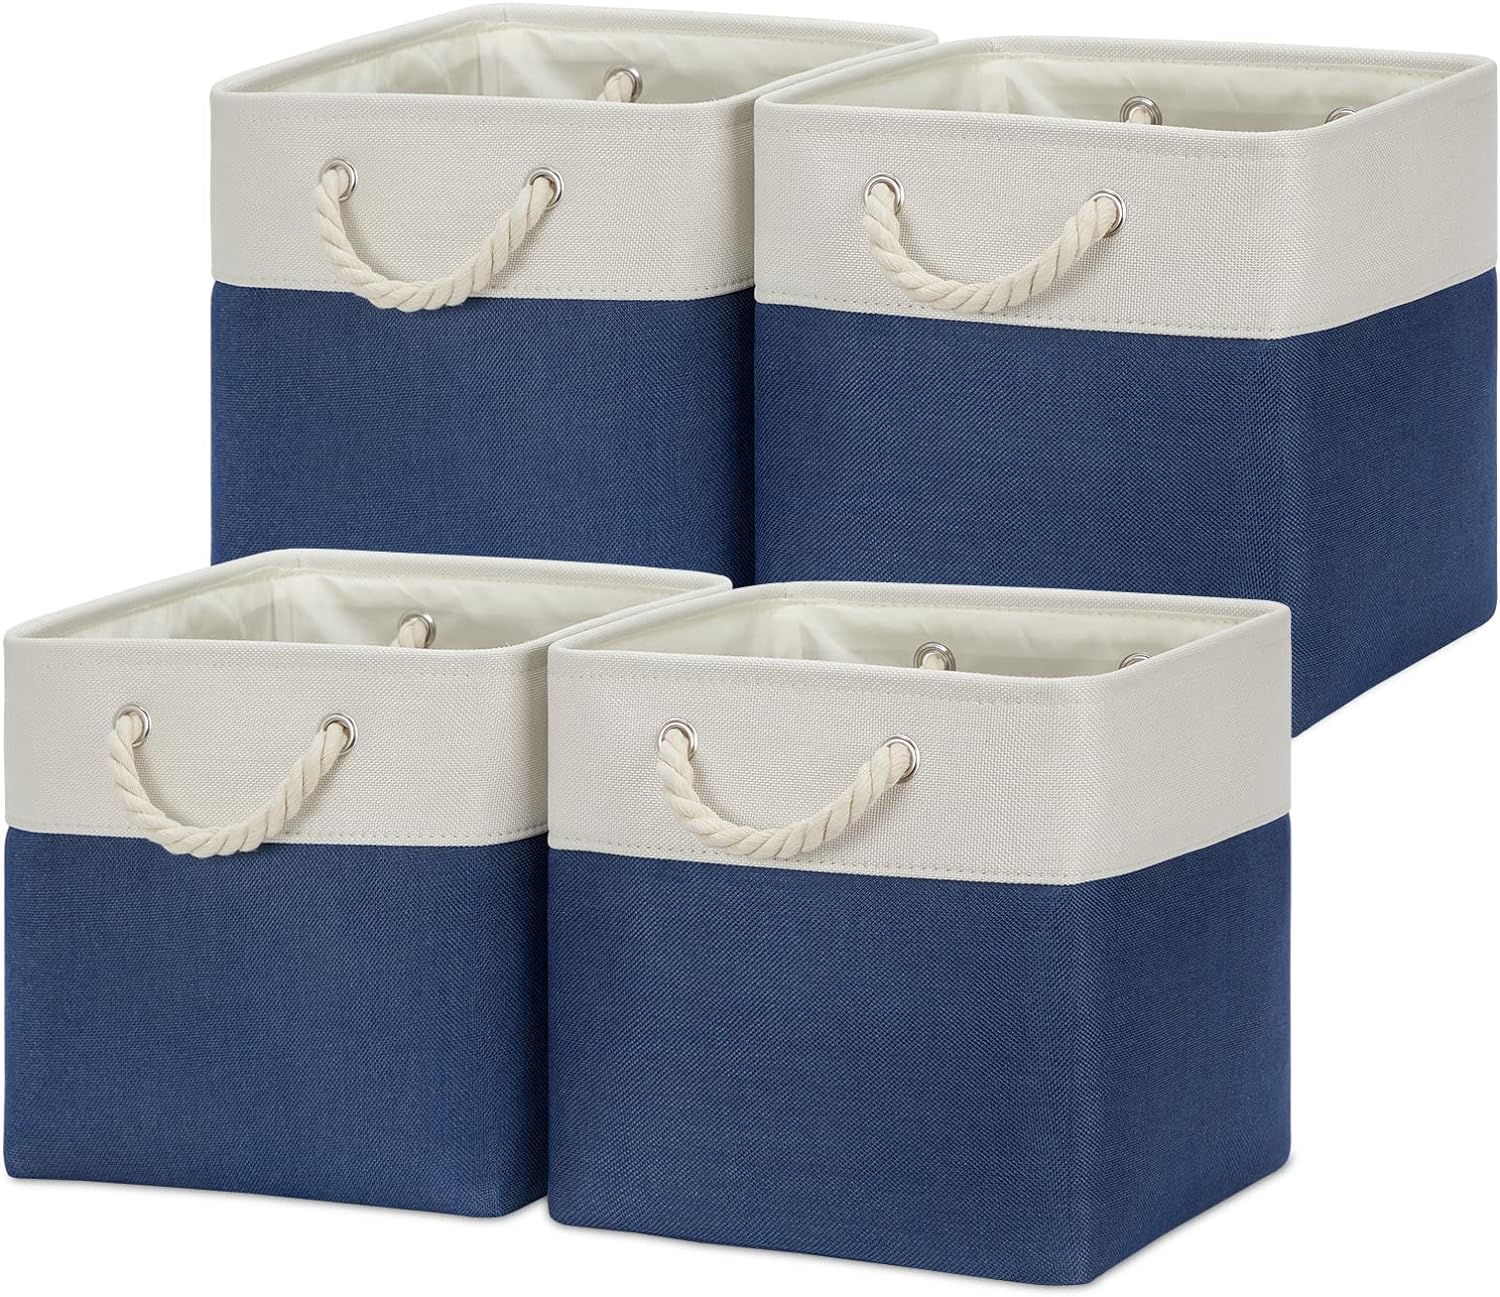 Temary Fabric Storage Cubes for Organizing 4Pack Blue Fabric Storage Basket 12 Inch Cube Storage Bins with Handles for Organizing Toys, Shelf Baskets for Home Office Closet (White&Blue)